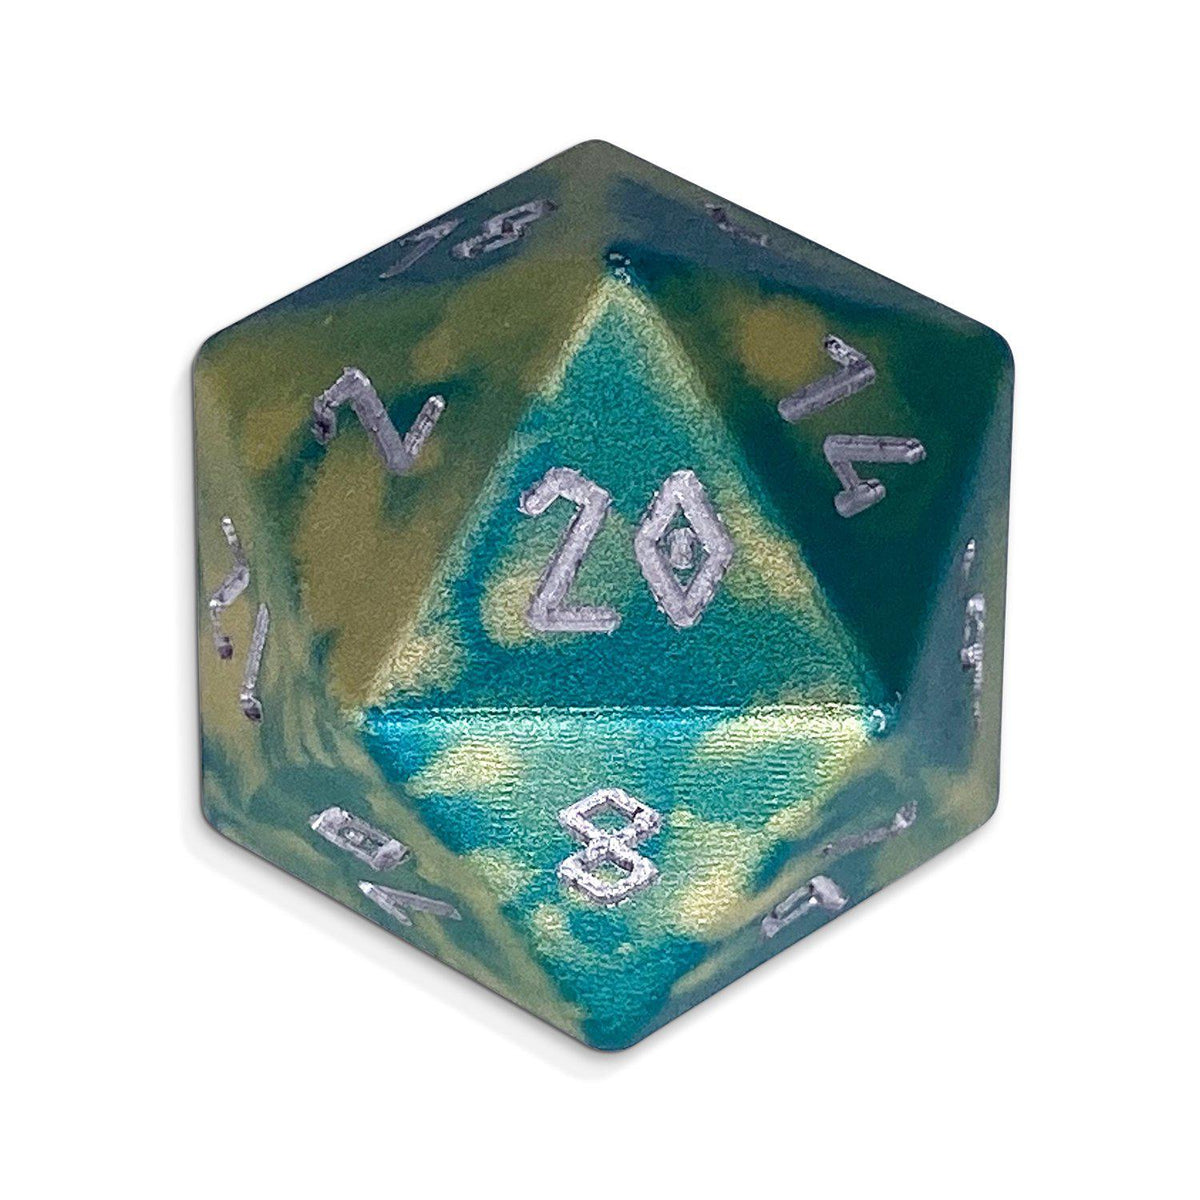 Single Wondrous Dice® D20 in Nautical Demise by Norse Foundry® 6063 Aircraft Grade Aluminum